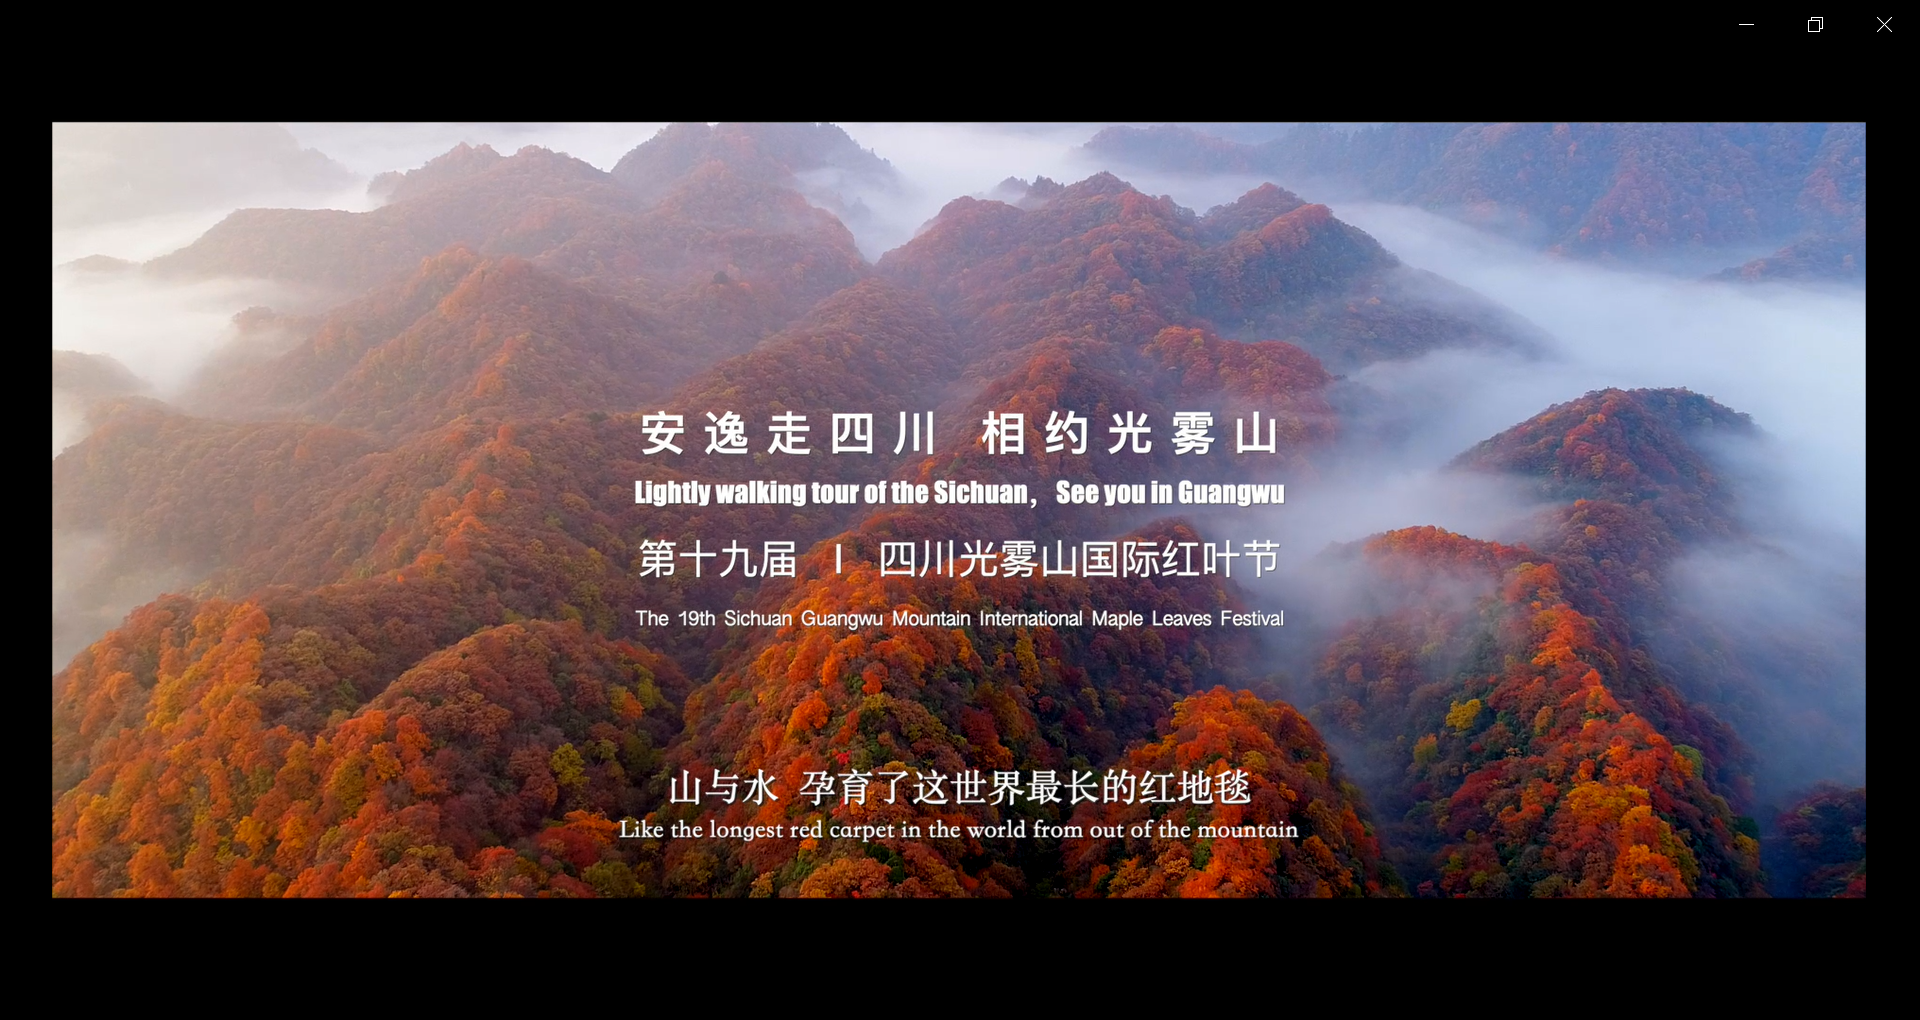 Lightly walking tour of the Sichuan, See you in Guangwu